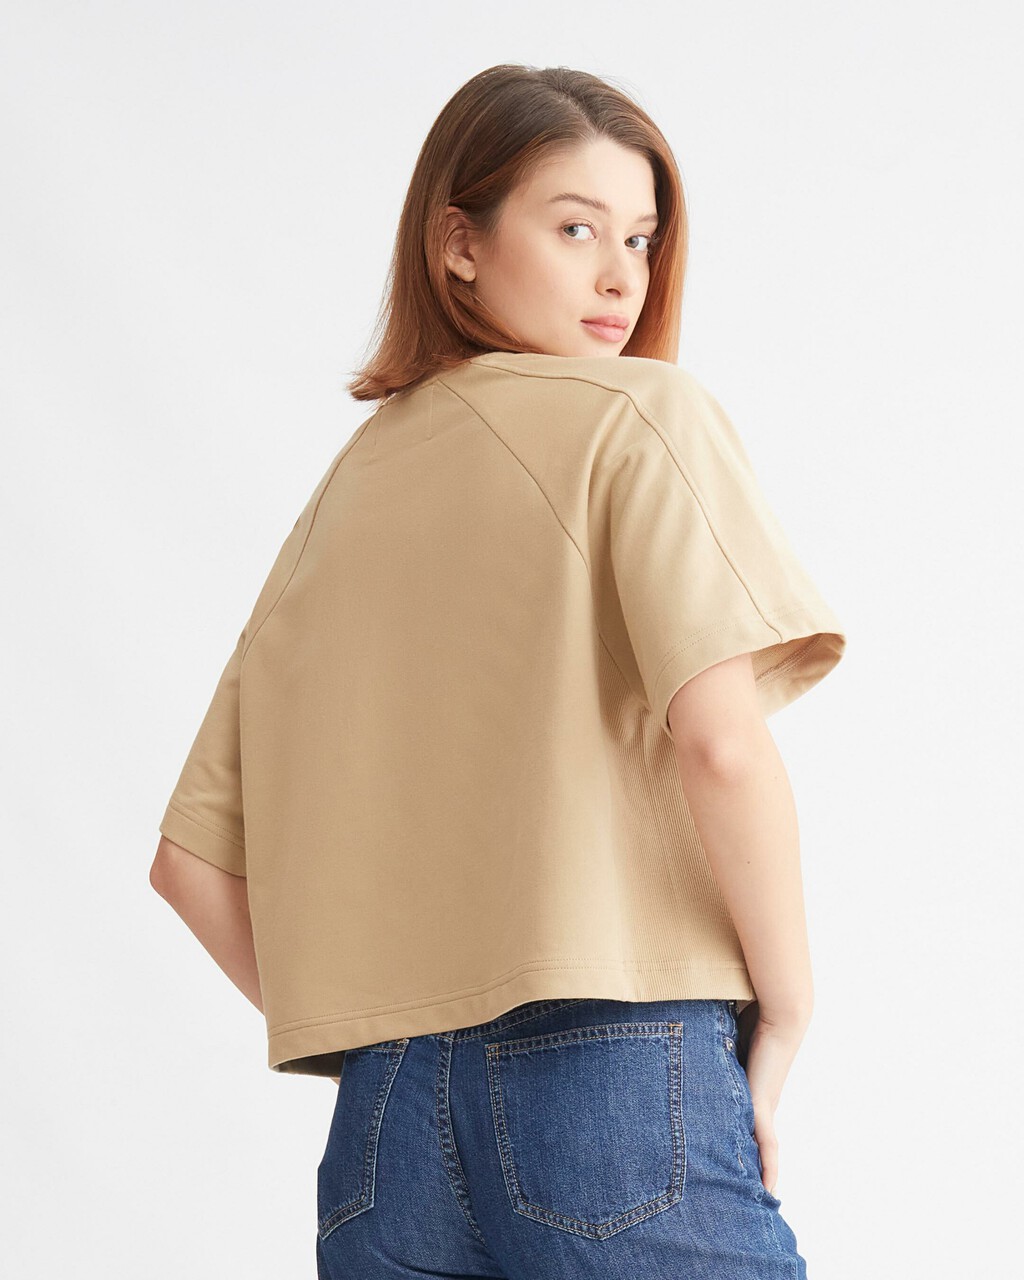 ARCHIVAL NEUTRALS RELAXED TOP, Travertine, hi-res